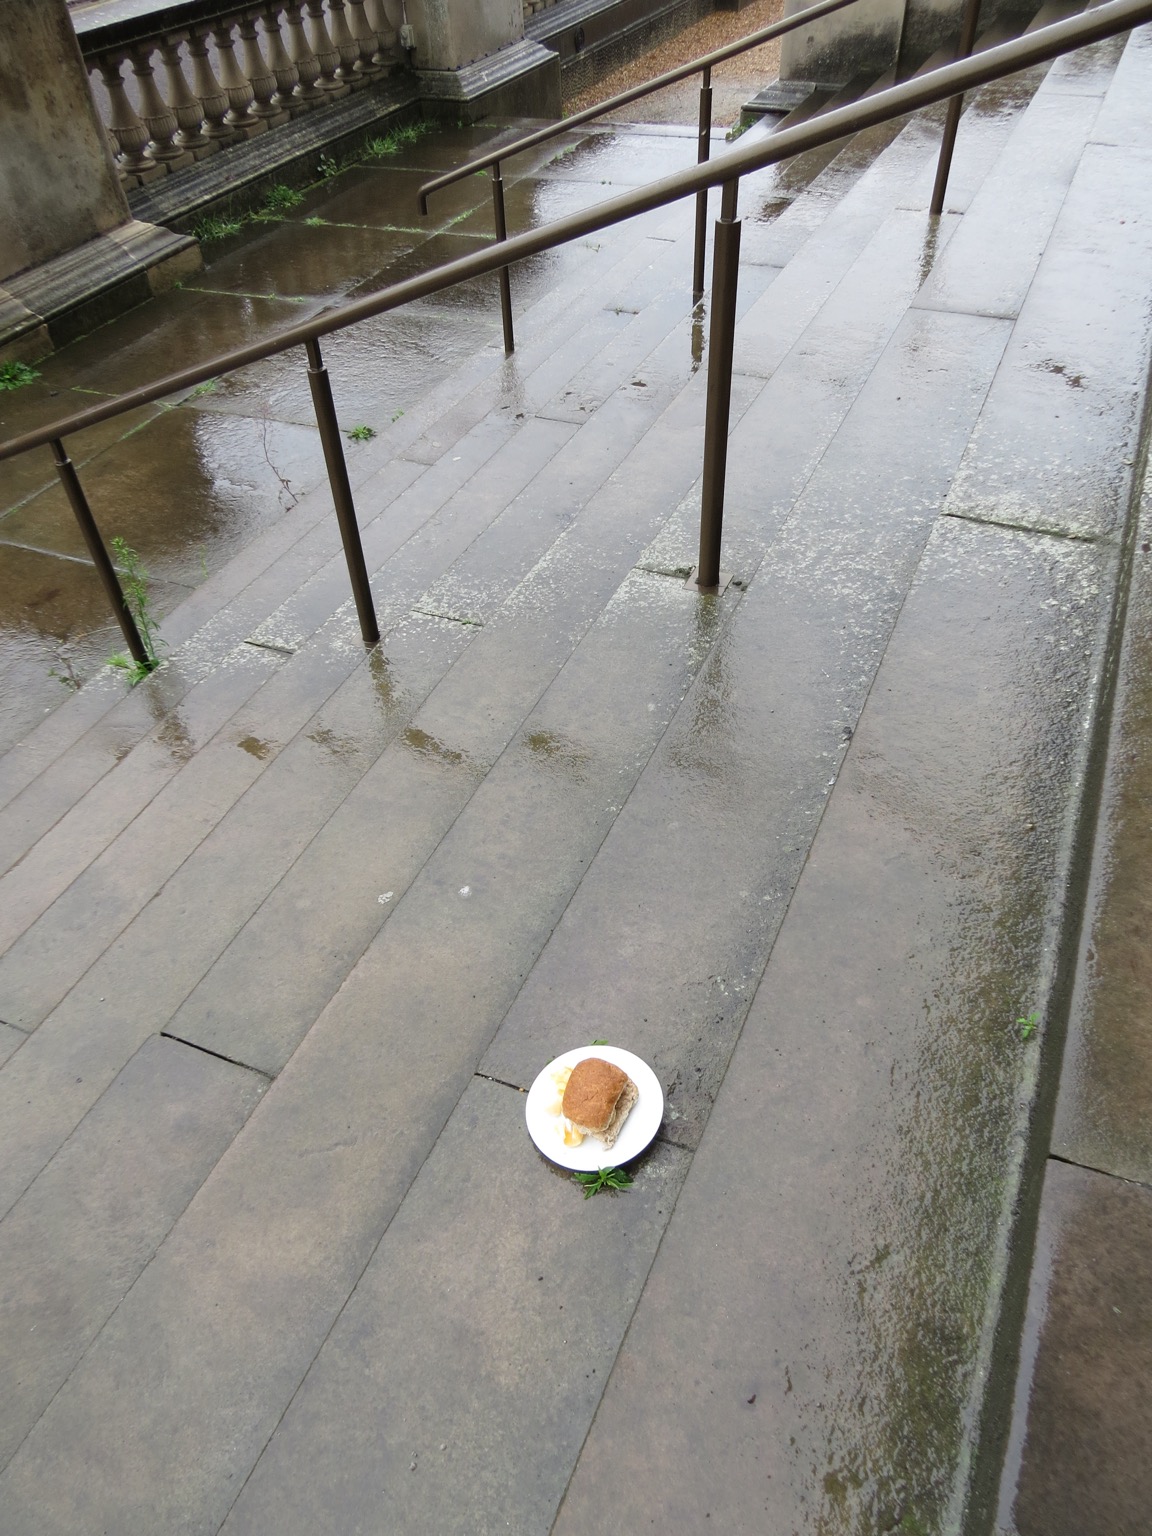 Wet steps featuring a brown roll containing Quavers